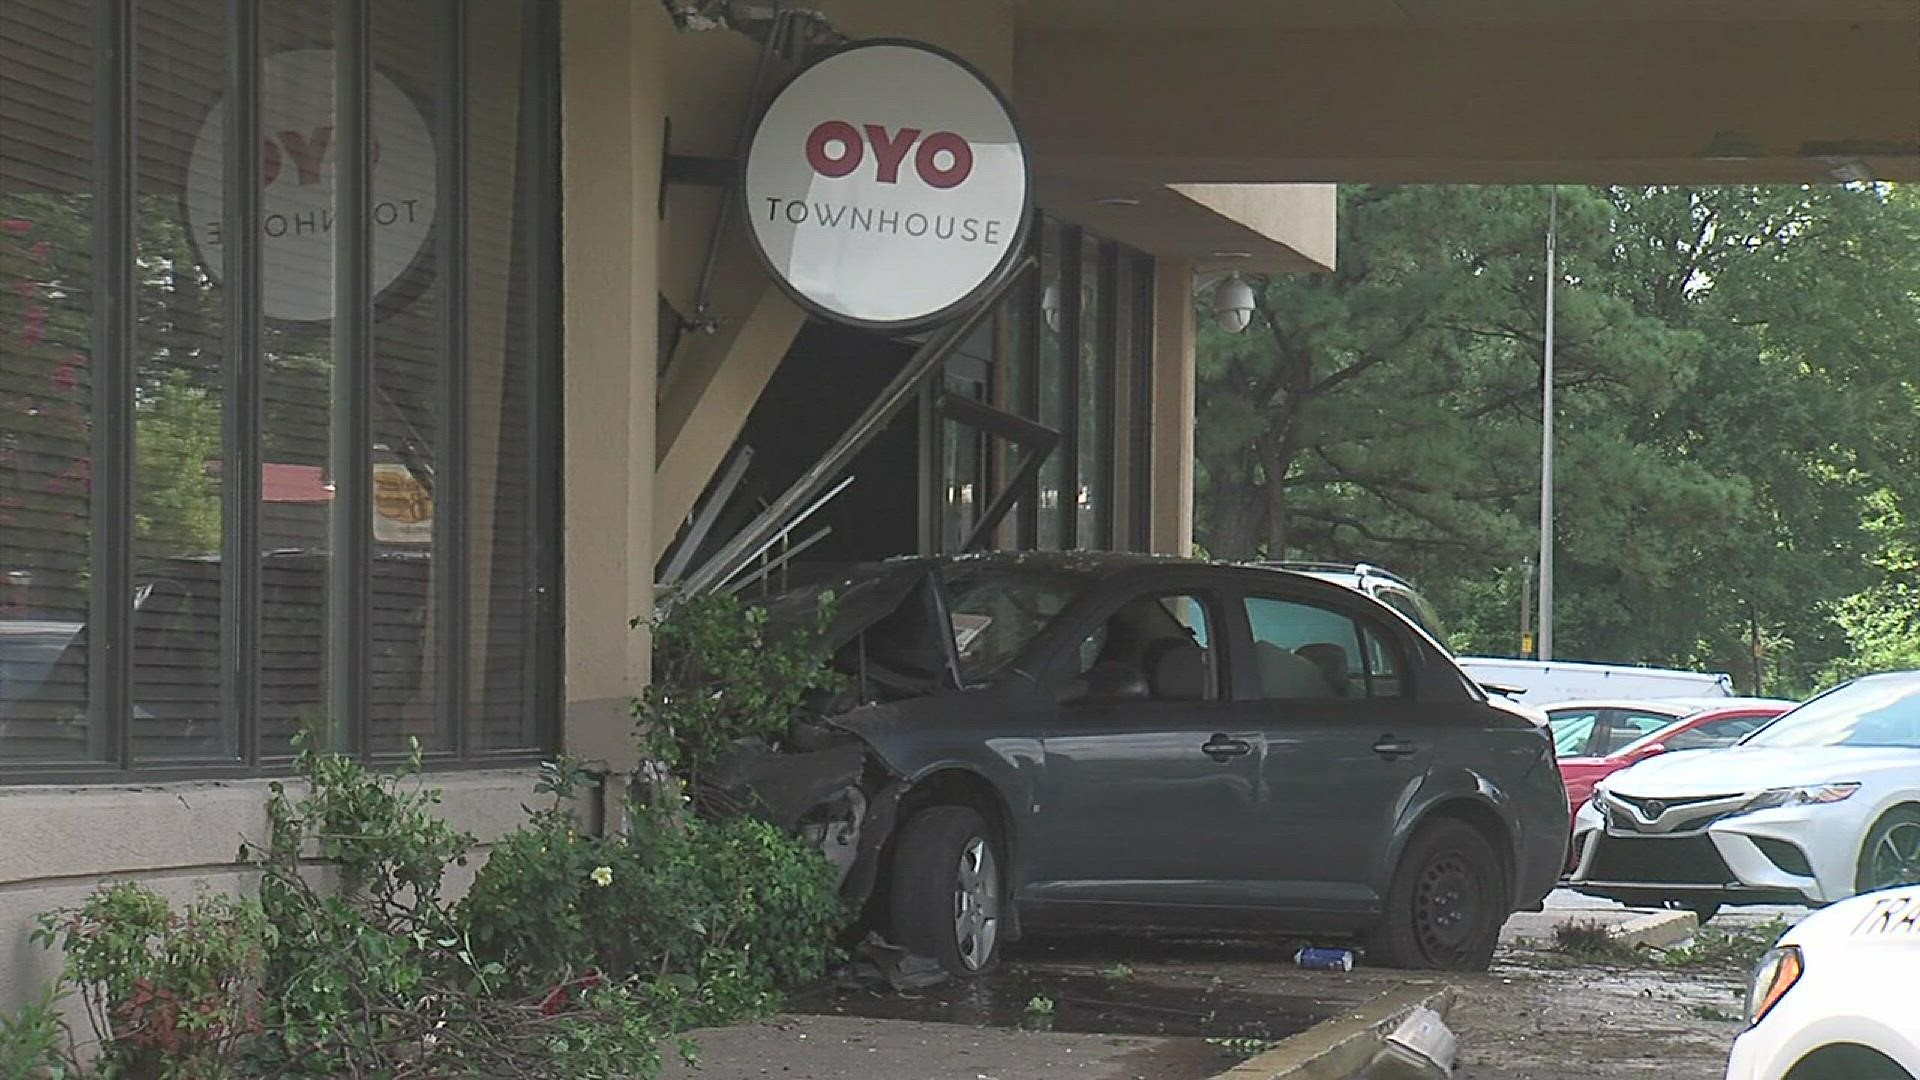 Damage to the front of the hotel and the 4-door sedan that smashed into it could be seen from the road.